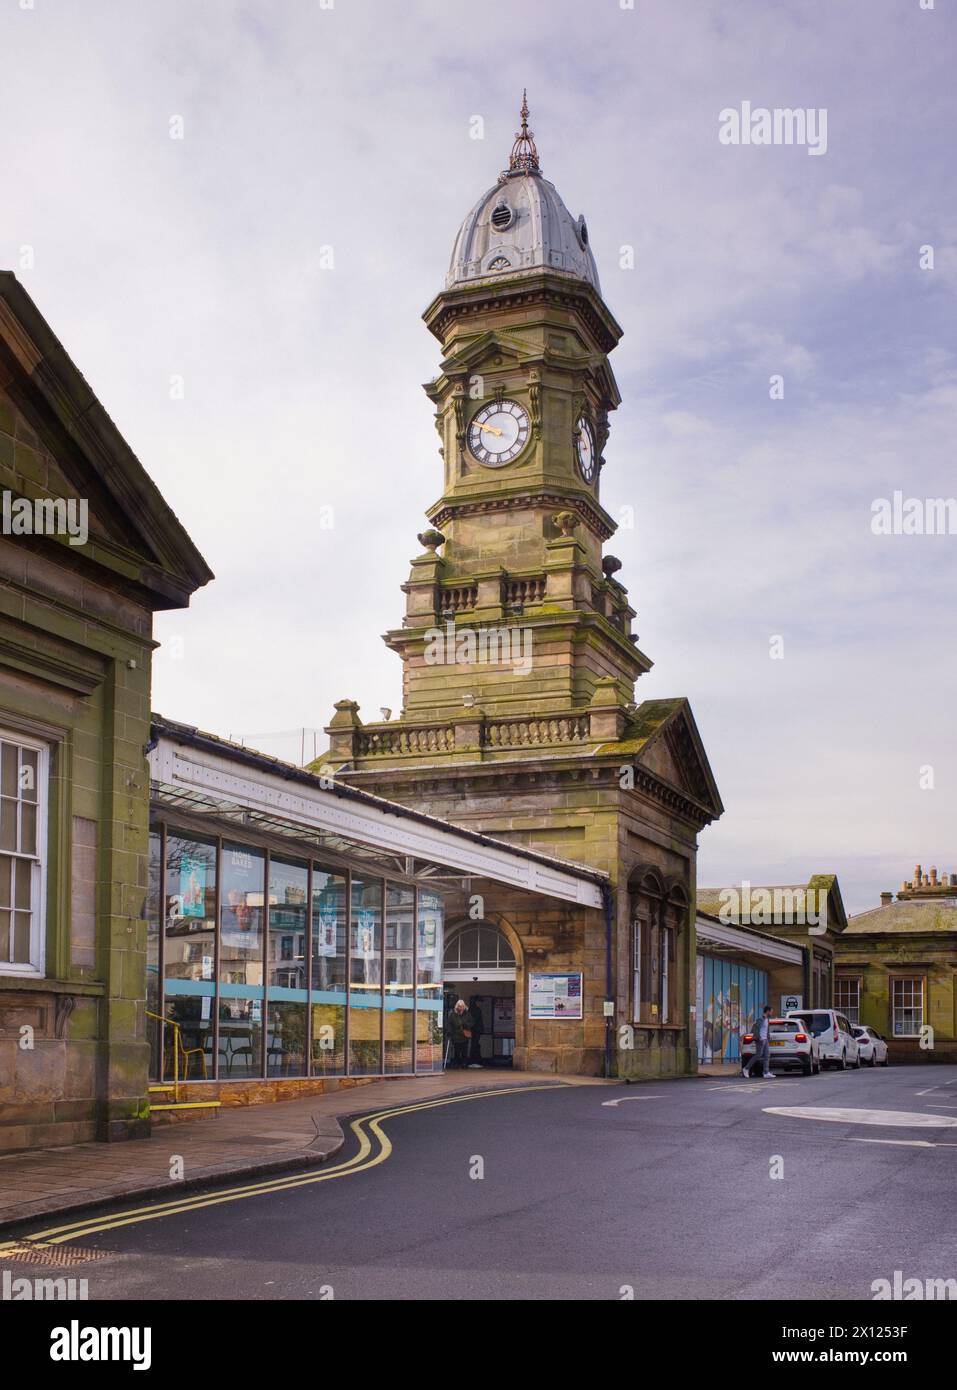 Entrance and the ornate tower of Scarborough railway station Stock Photo